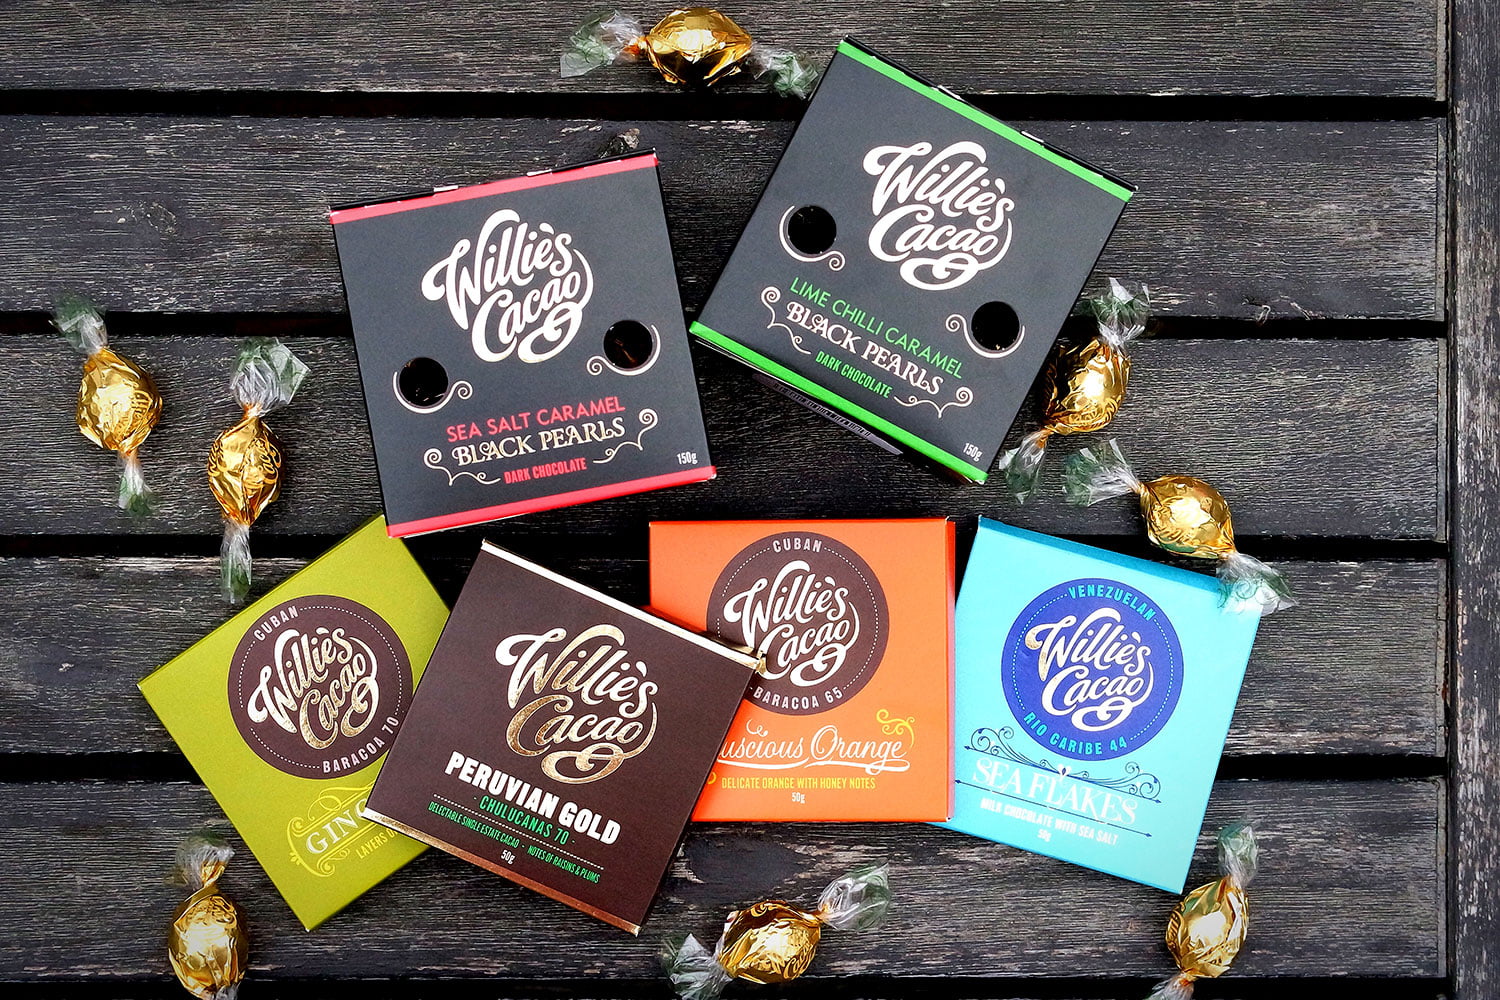 An assortment of chocolates from Willie's Cacao